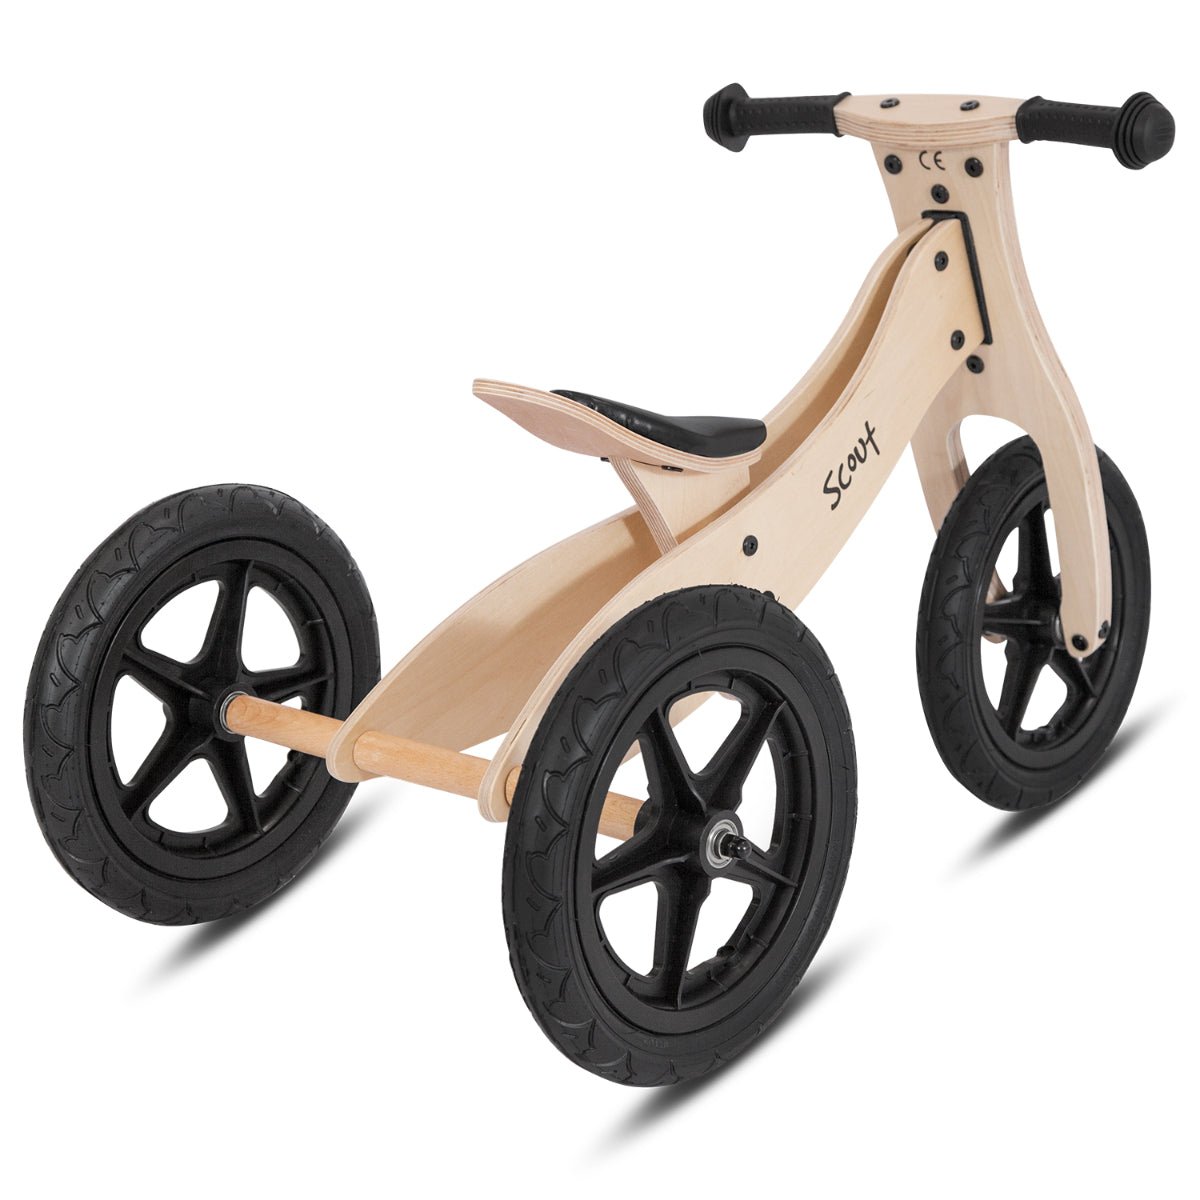 Get the Scout 2-in-1 Balance Bike & Trike: Begin the Riding Journey